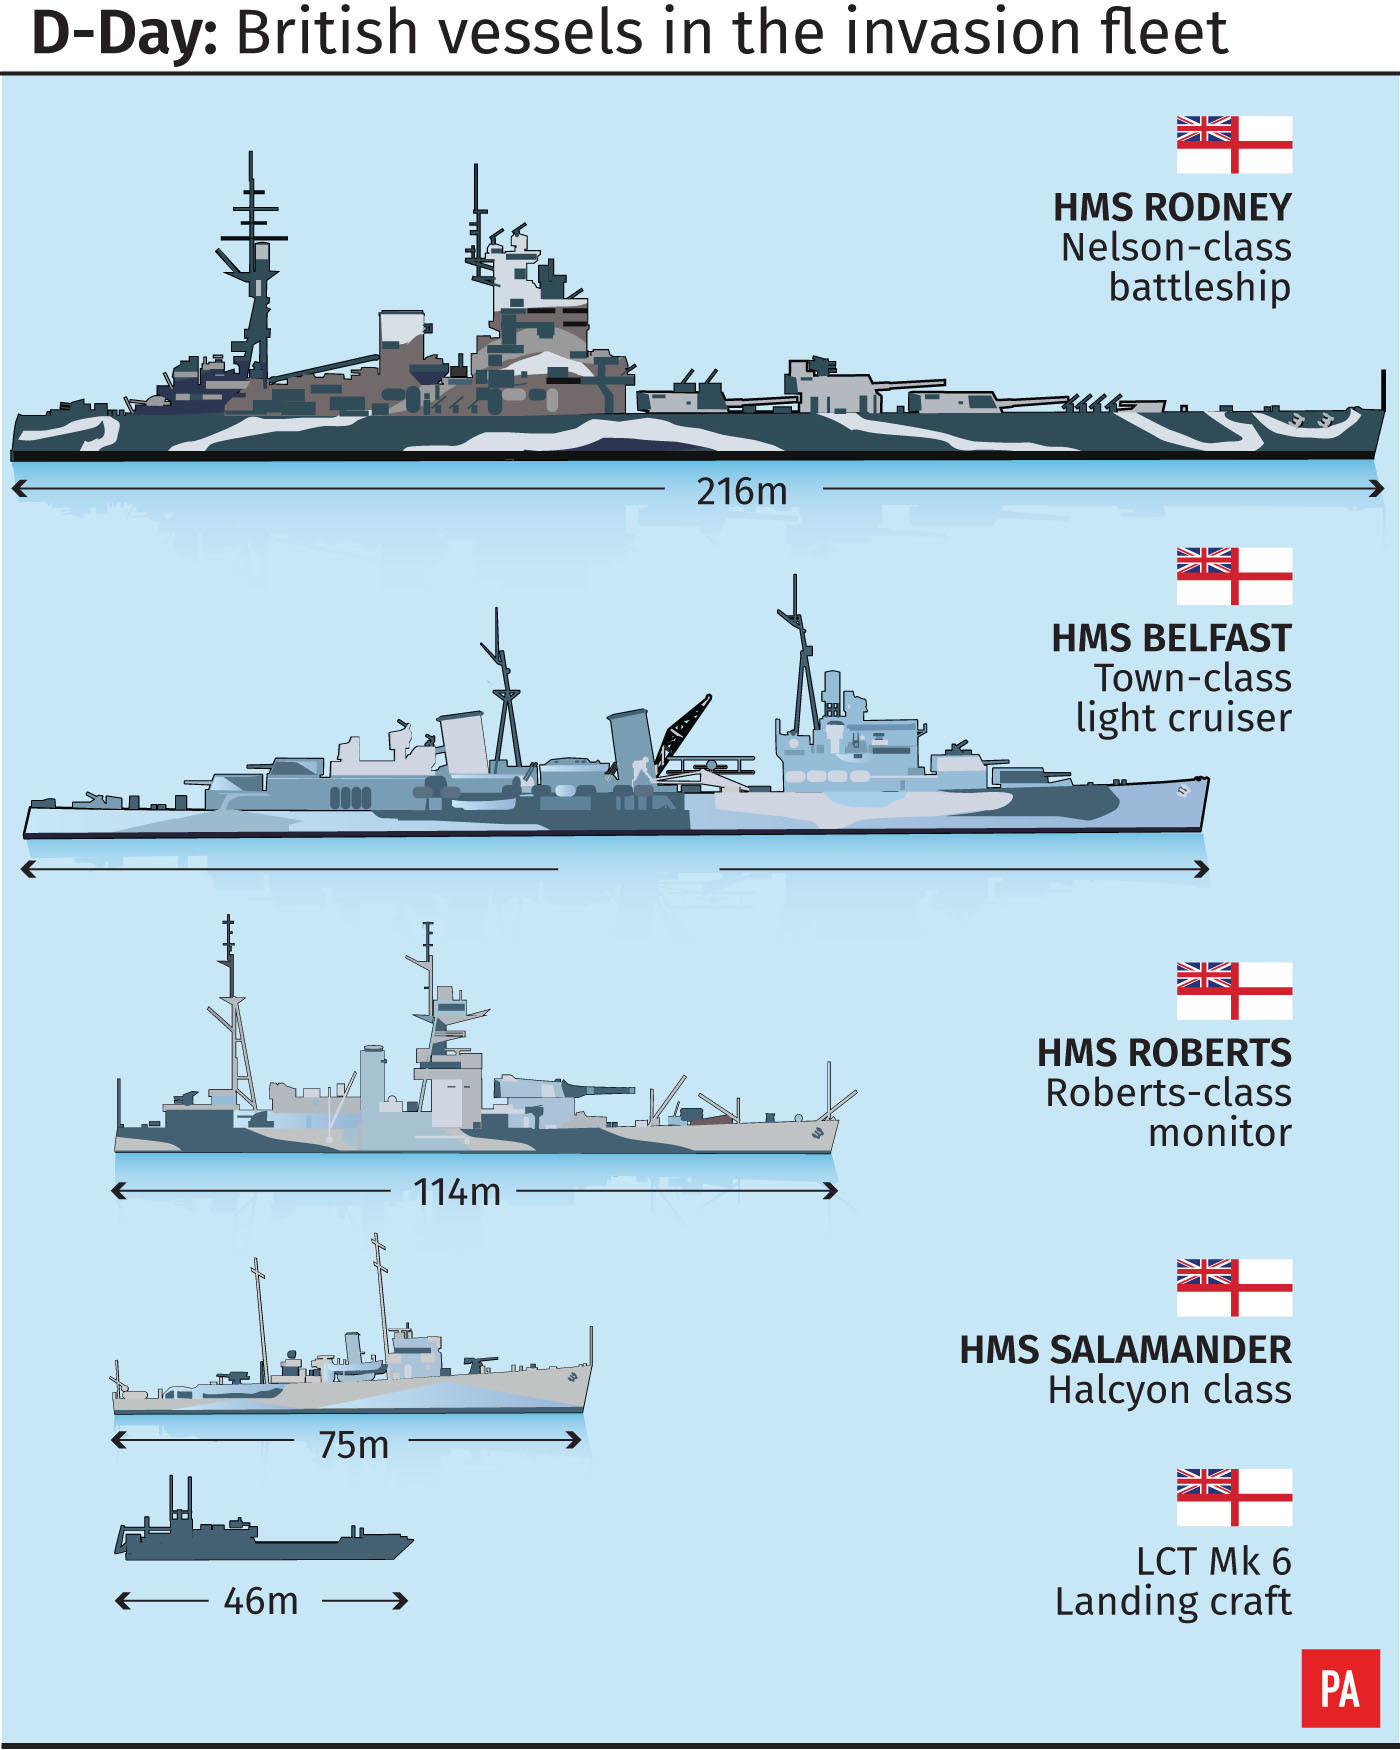 D-Day vessels